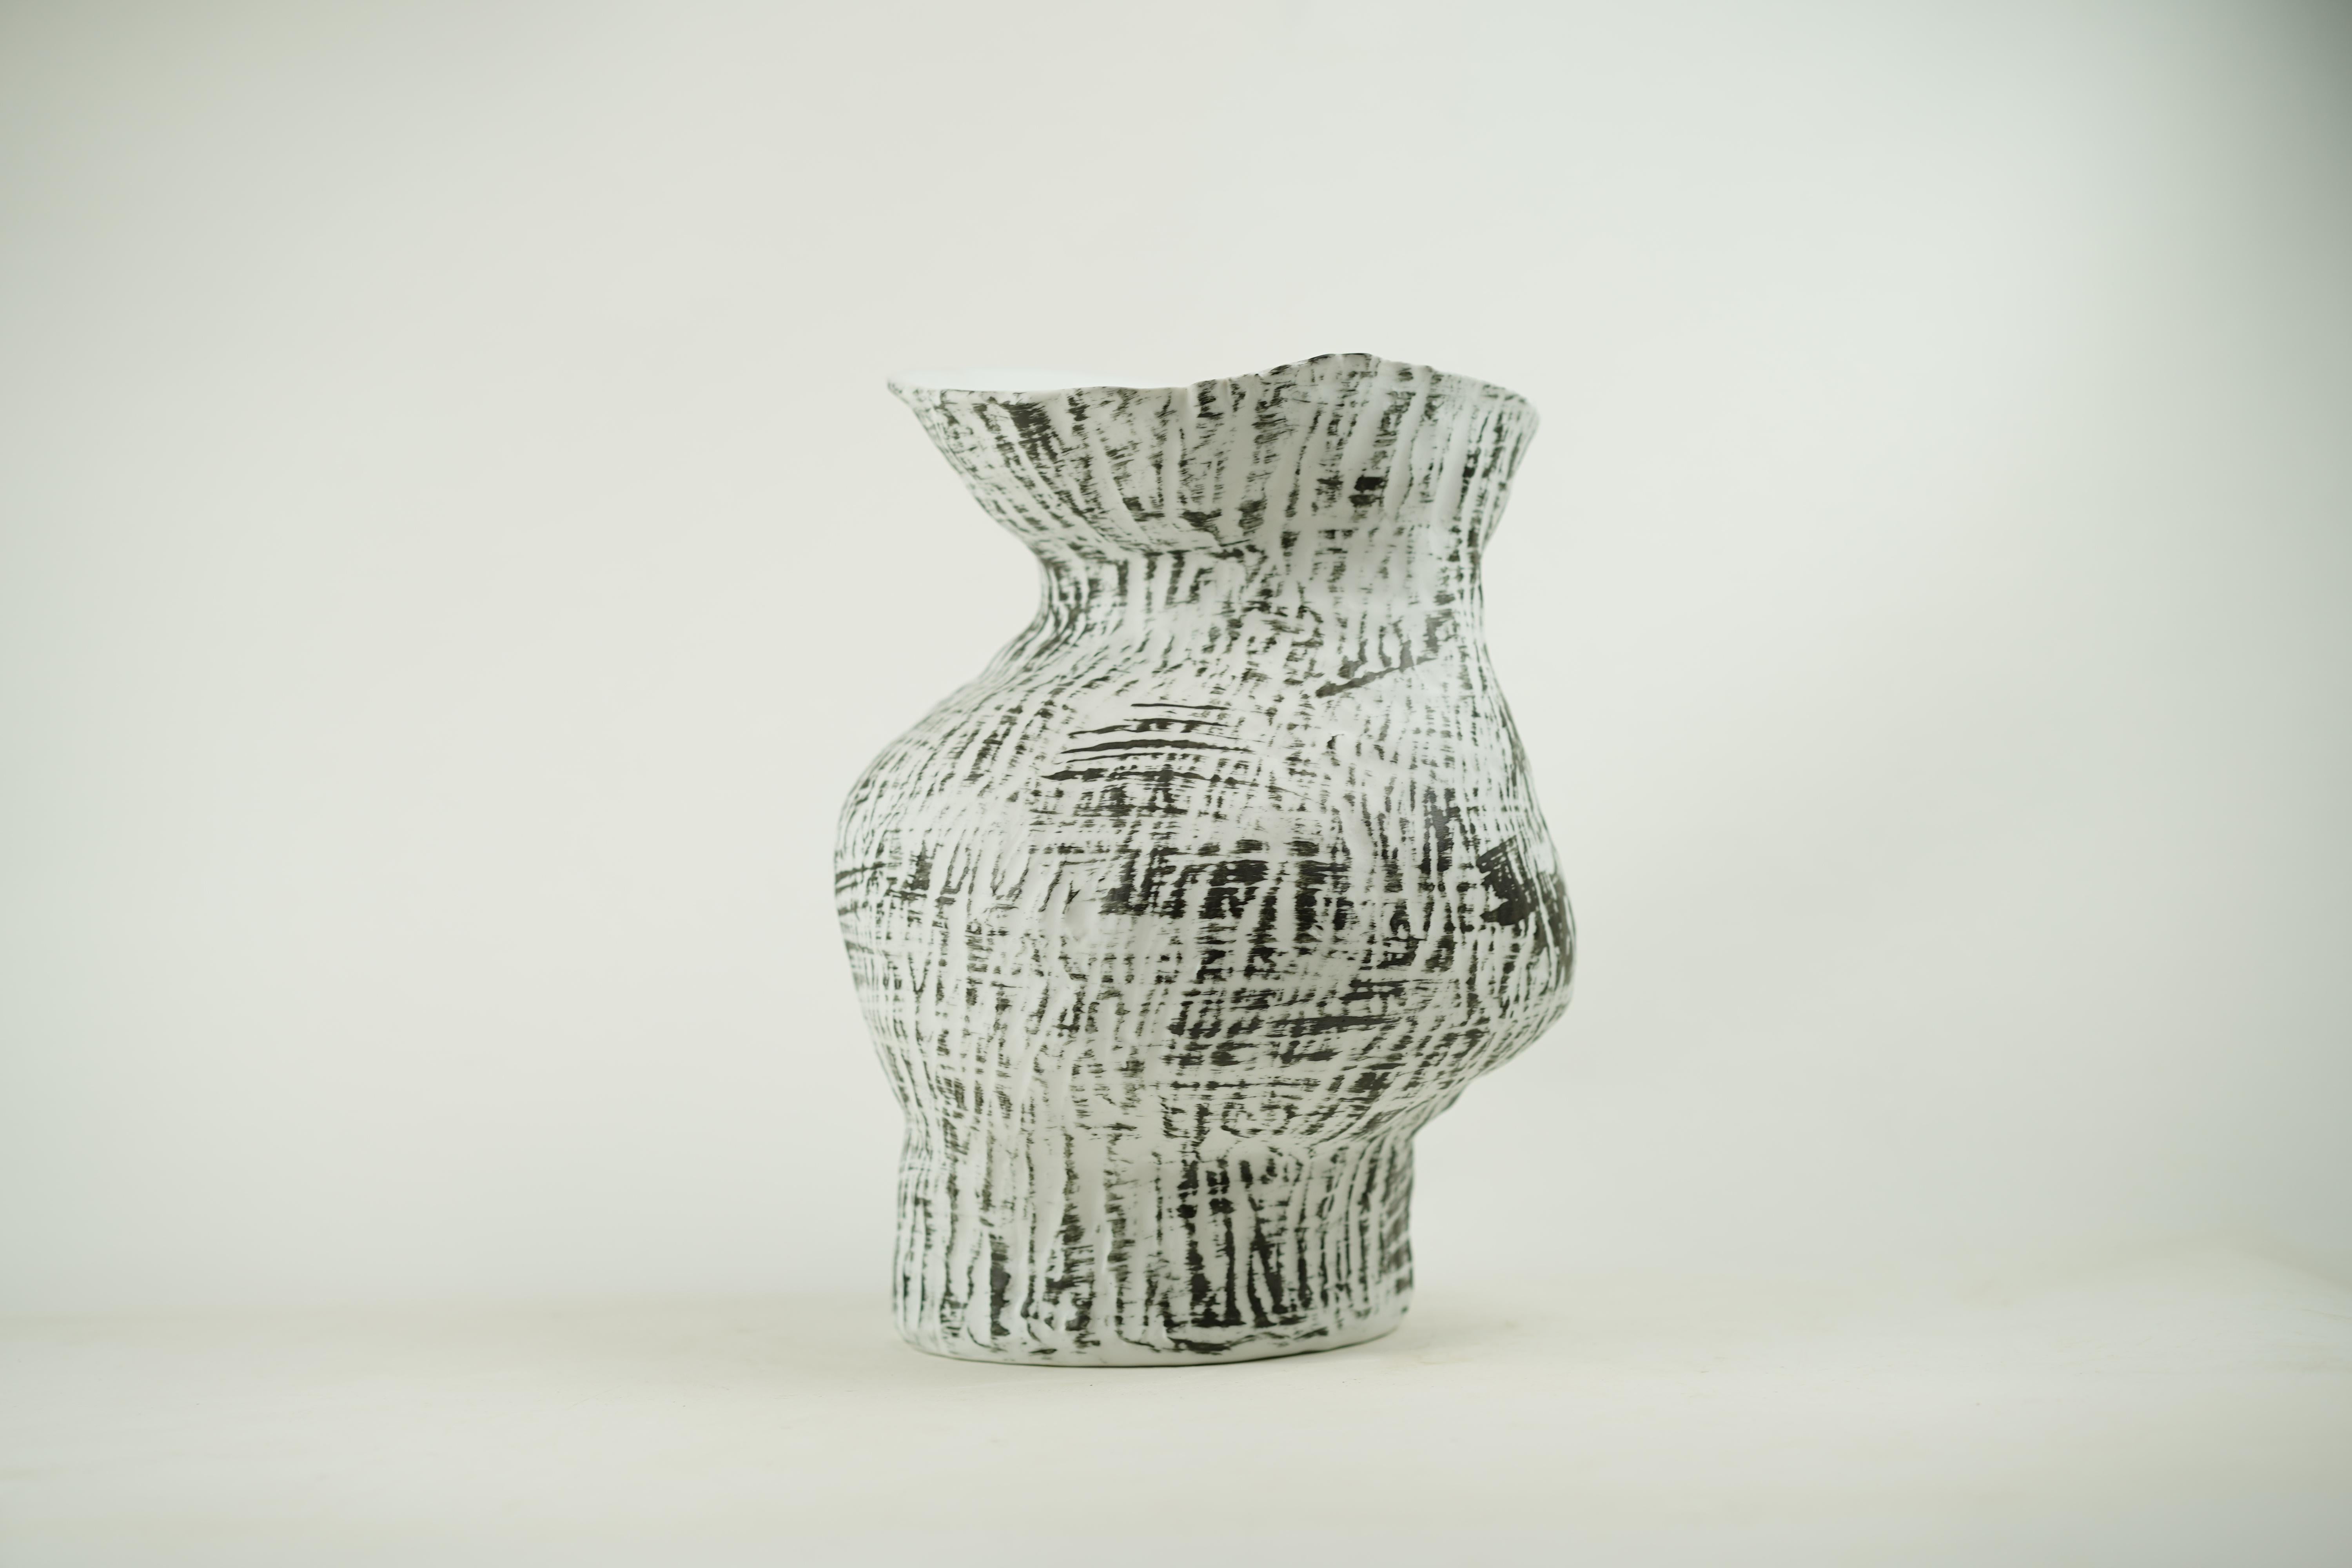 The Surface vase embodies organic landscapes that naturally bend and crease. Its asymmetrical curves feel wholesome because they speak to wabi-sabi's appreciation for the unrefined. Rustic and raw, it is crafted without tools, preserving the art of